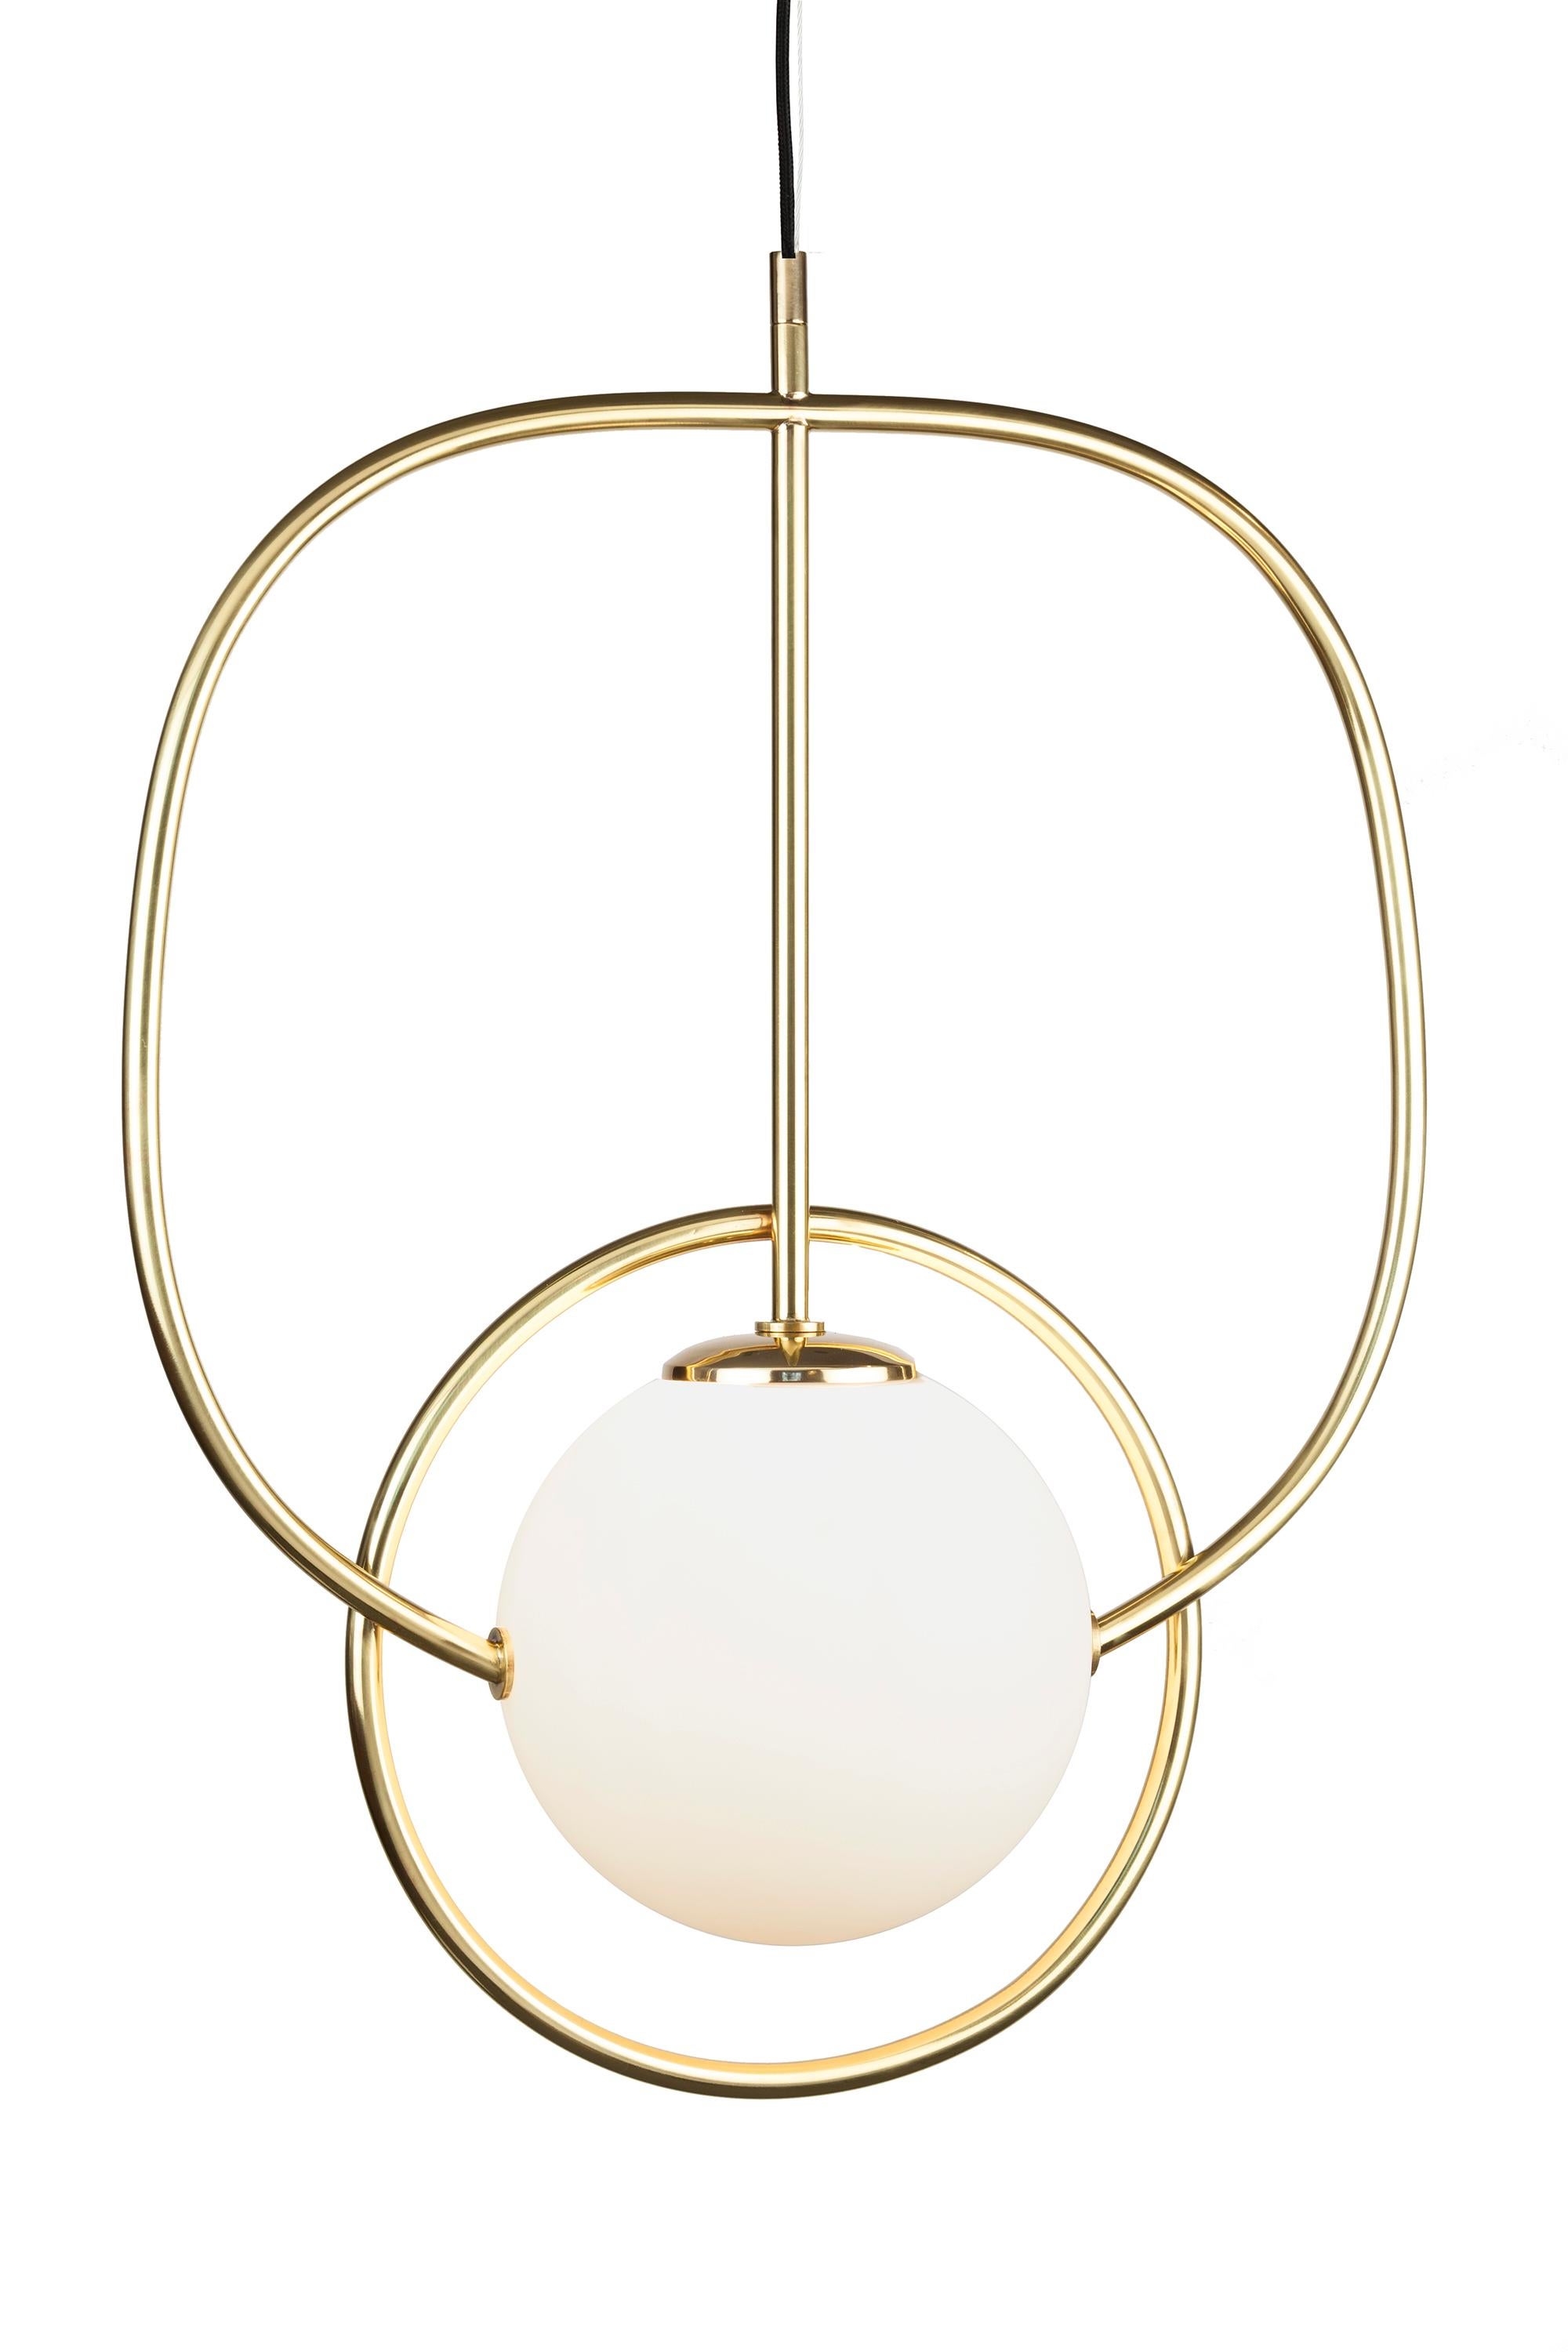 Loop suspension lamp evokes a sense of playfulness thanks to the juxtaposition of primary shapes. It can be used to create a modern yet timeless space and resembles a modern, elegant sculpture, producing a magical luminous atmosphere. Made to Order.